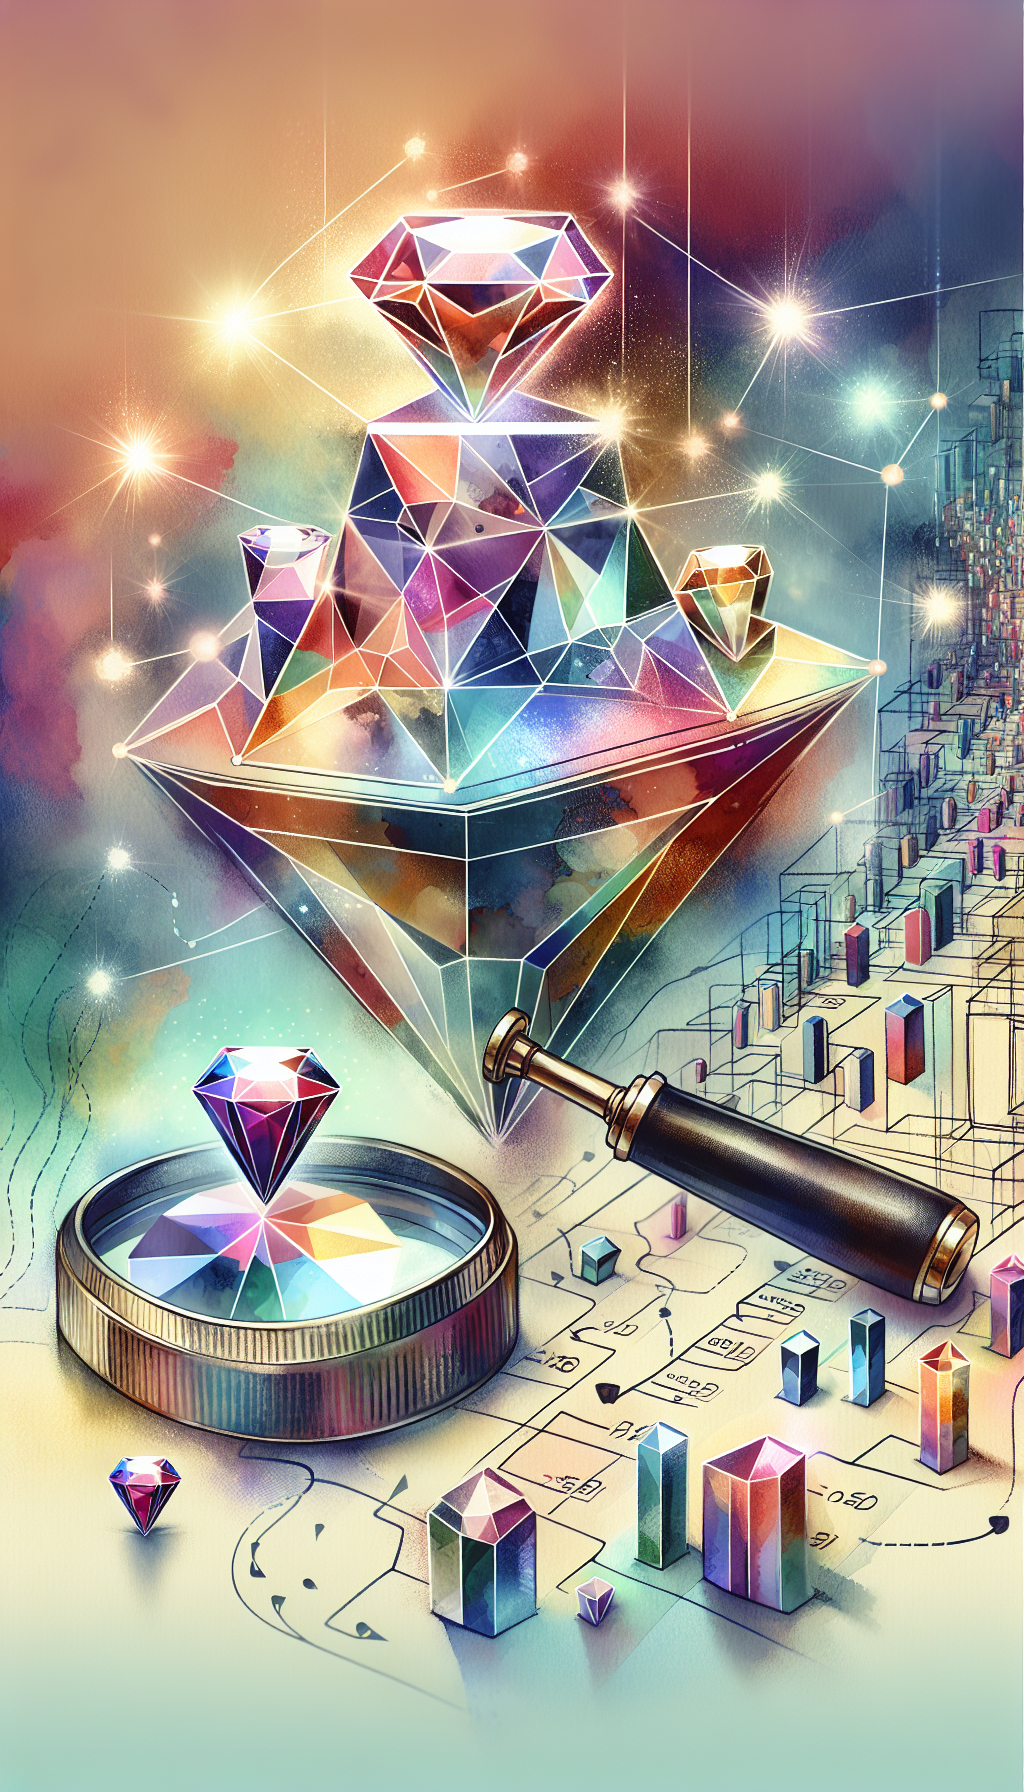 An illustration featuring a jeweler's magnifying loupe perched atop a pyramid of critical appraisal elements - gemstone cut, carat, clarity, and color gradients. Below, a map dotted with star icons indicating appraisal locations, leading to a bustling marketplace of buyers with price tags. Each element rendered in distinct styles: realistic gemstones, a watercolor map, and abstract, geometric buyers and sellers.